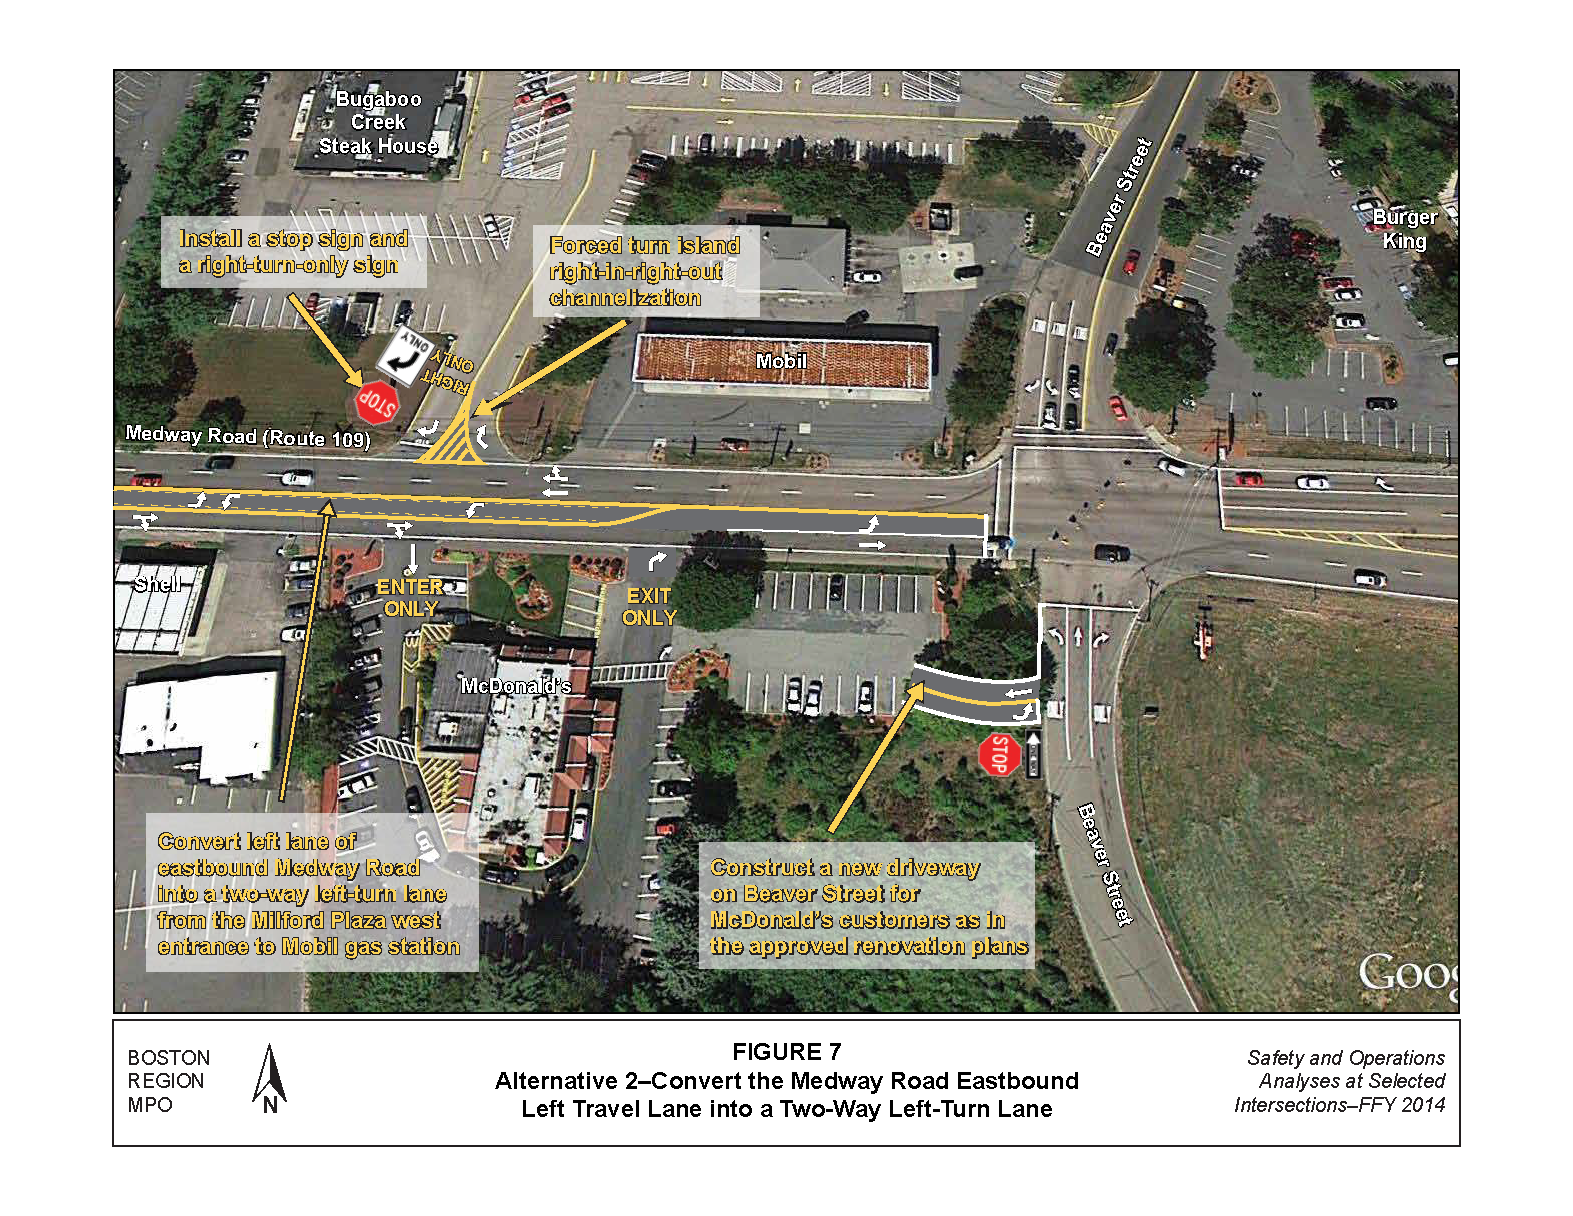 FIGURE 7. Aerial-view map that illustrates MPO staff “Improvement Alternative 2,” which recommends converting the Medway Road eastbound left travel lane into a two-way left-turn lane in order to improve safety and access to businesses on Medway Road.